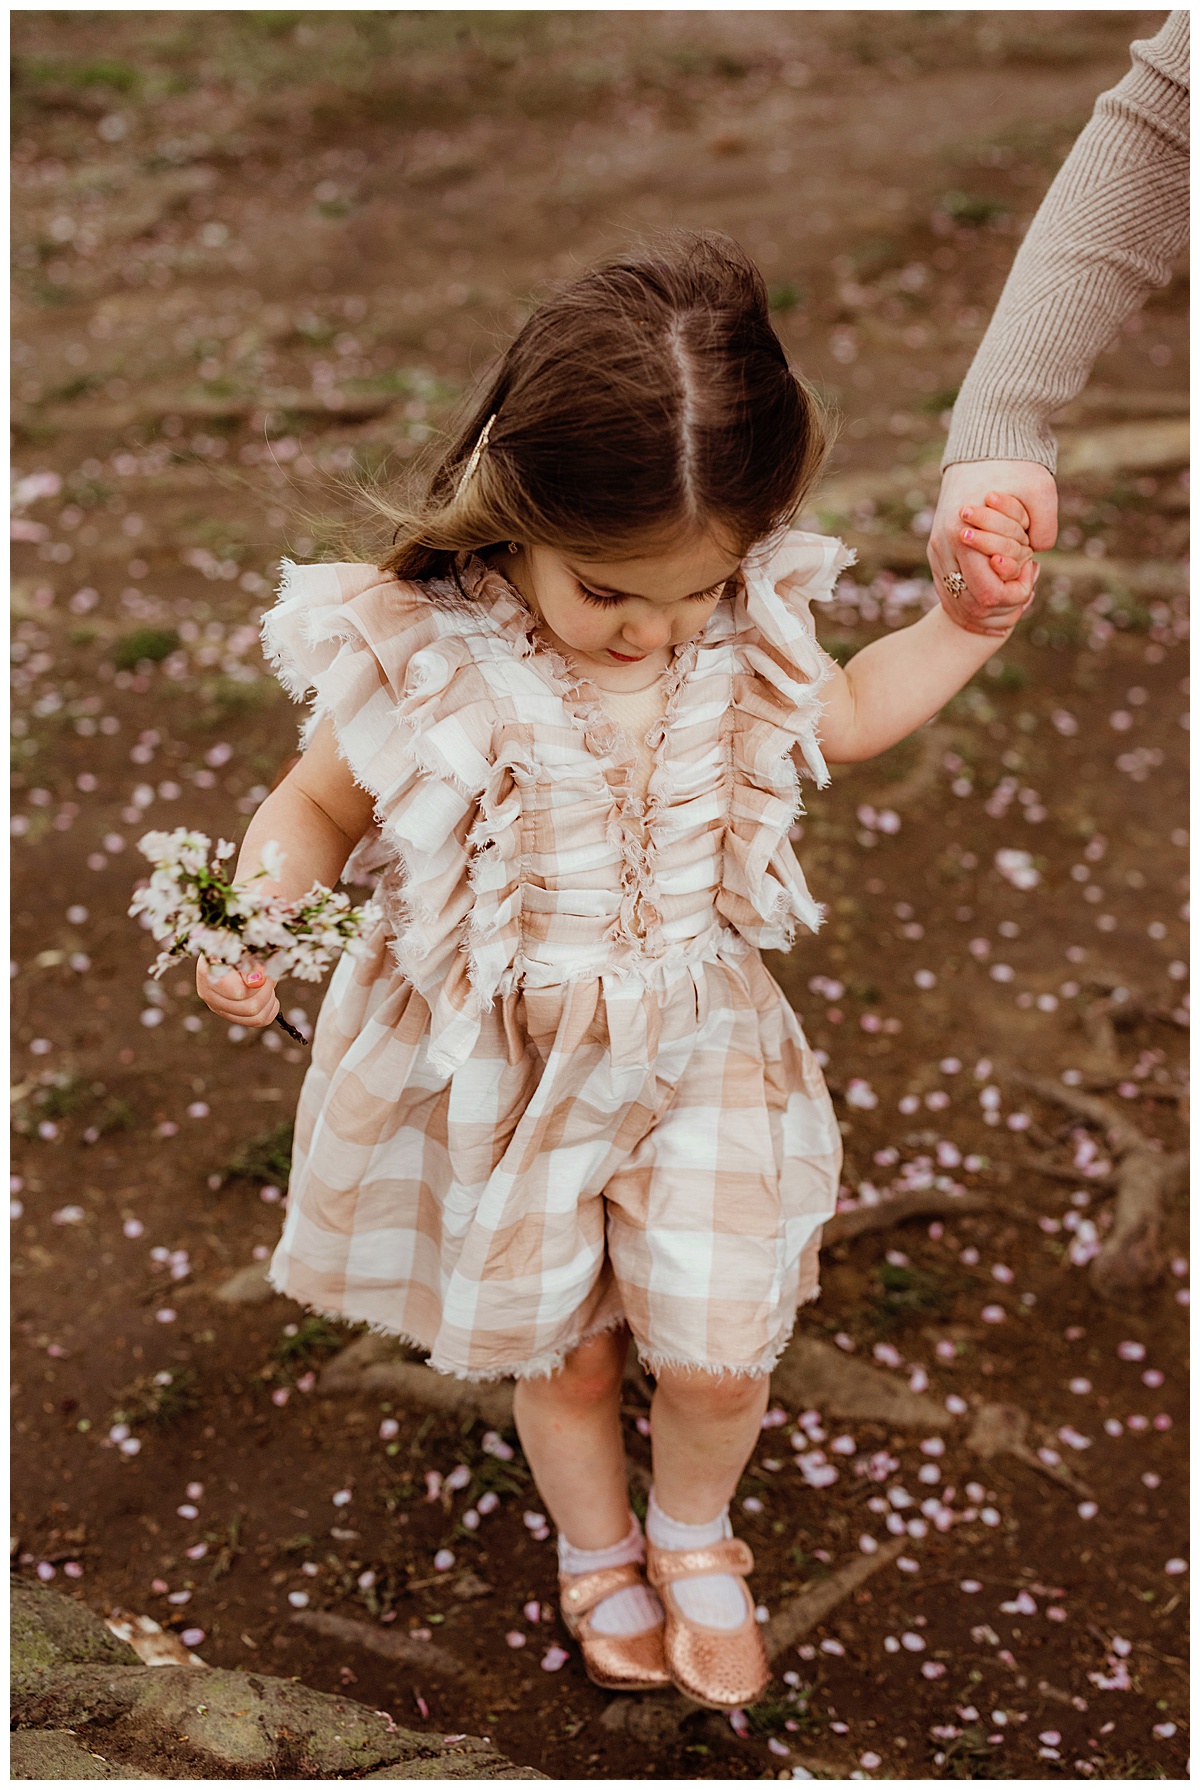 Little girl collects flowers for Norma Fayak Photography 